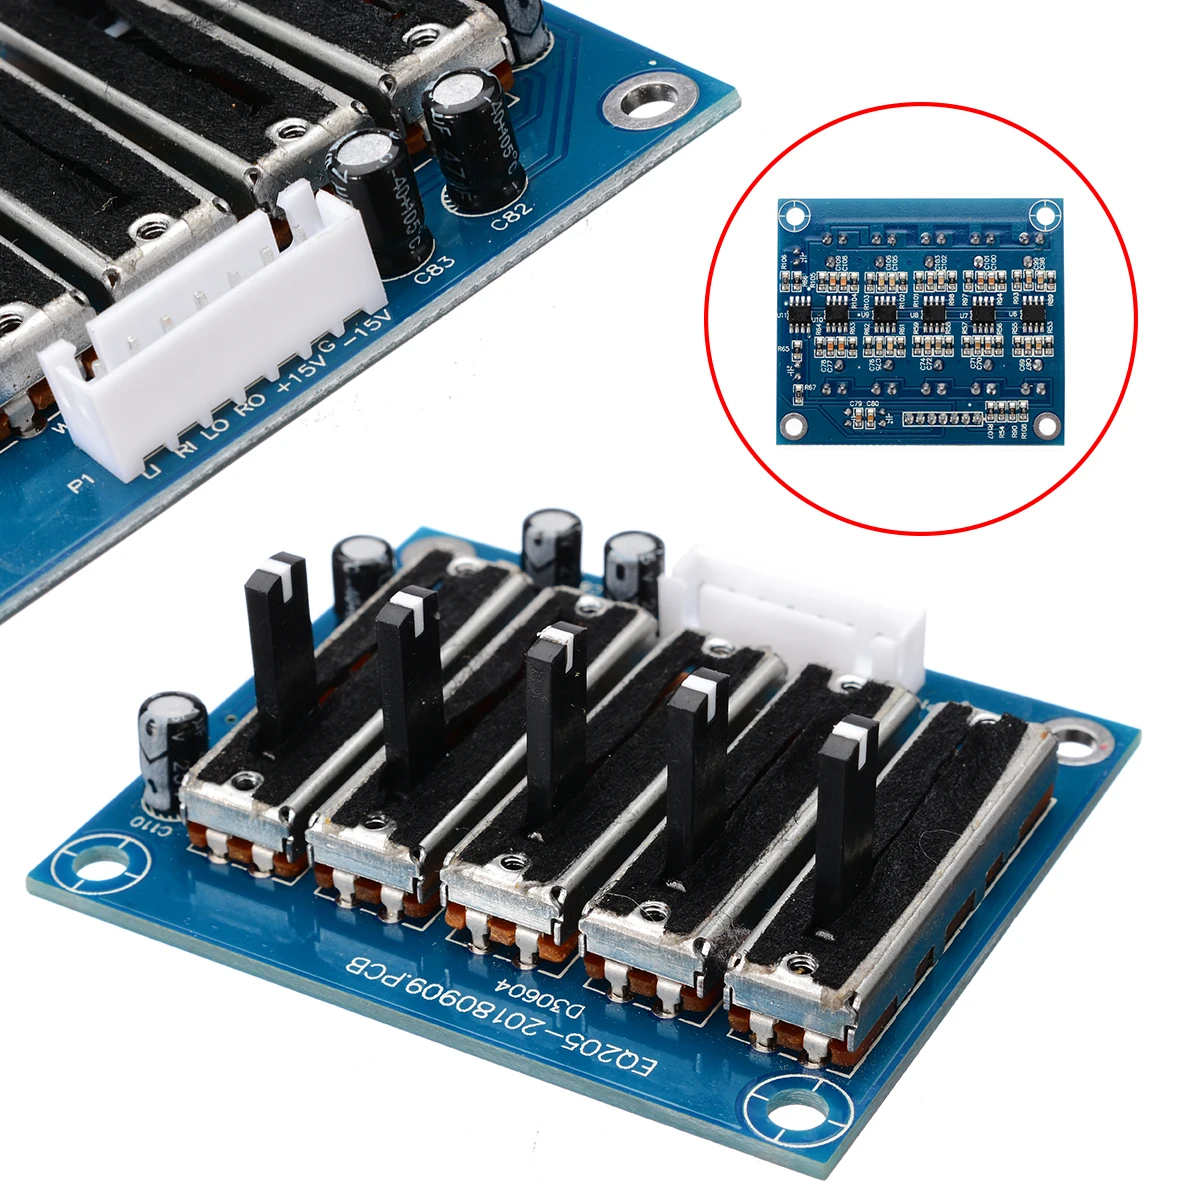 Stereo 5-band Equalizer EQ Board Adjustable 5-segment Audio Tone Preamplifier Board Module Dual Power for Amplifier tda1308 headphone headset amplifier board amp preamplifier module 3v 6v for dc